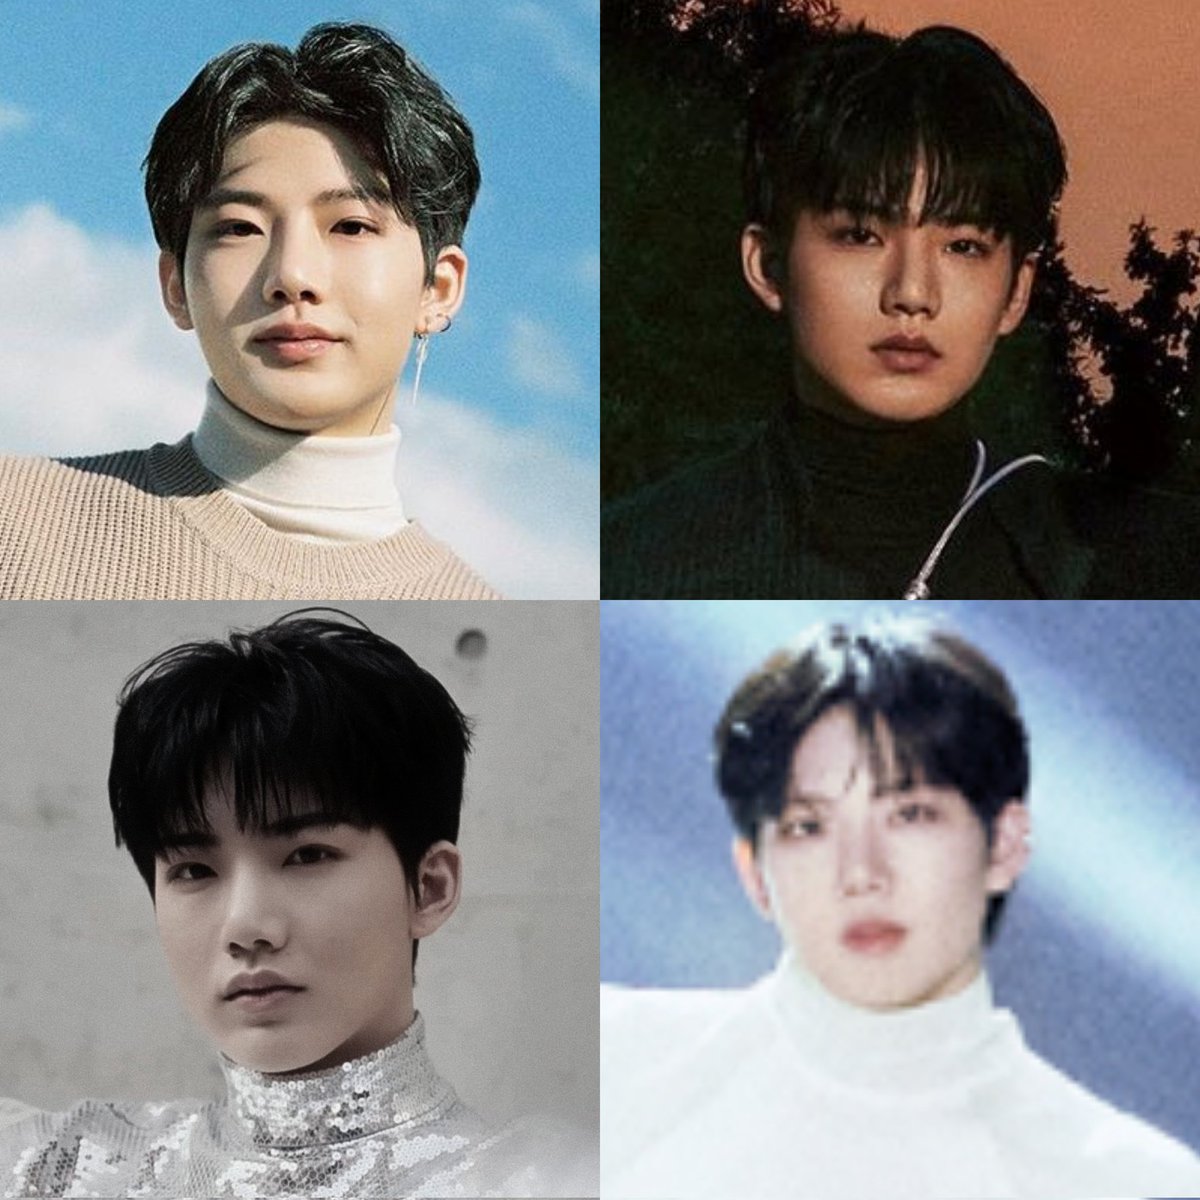 another best thing that happened, junkyu in the turtleneck 🔥